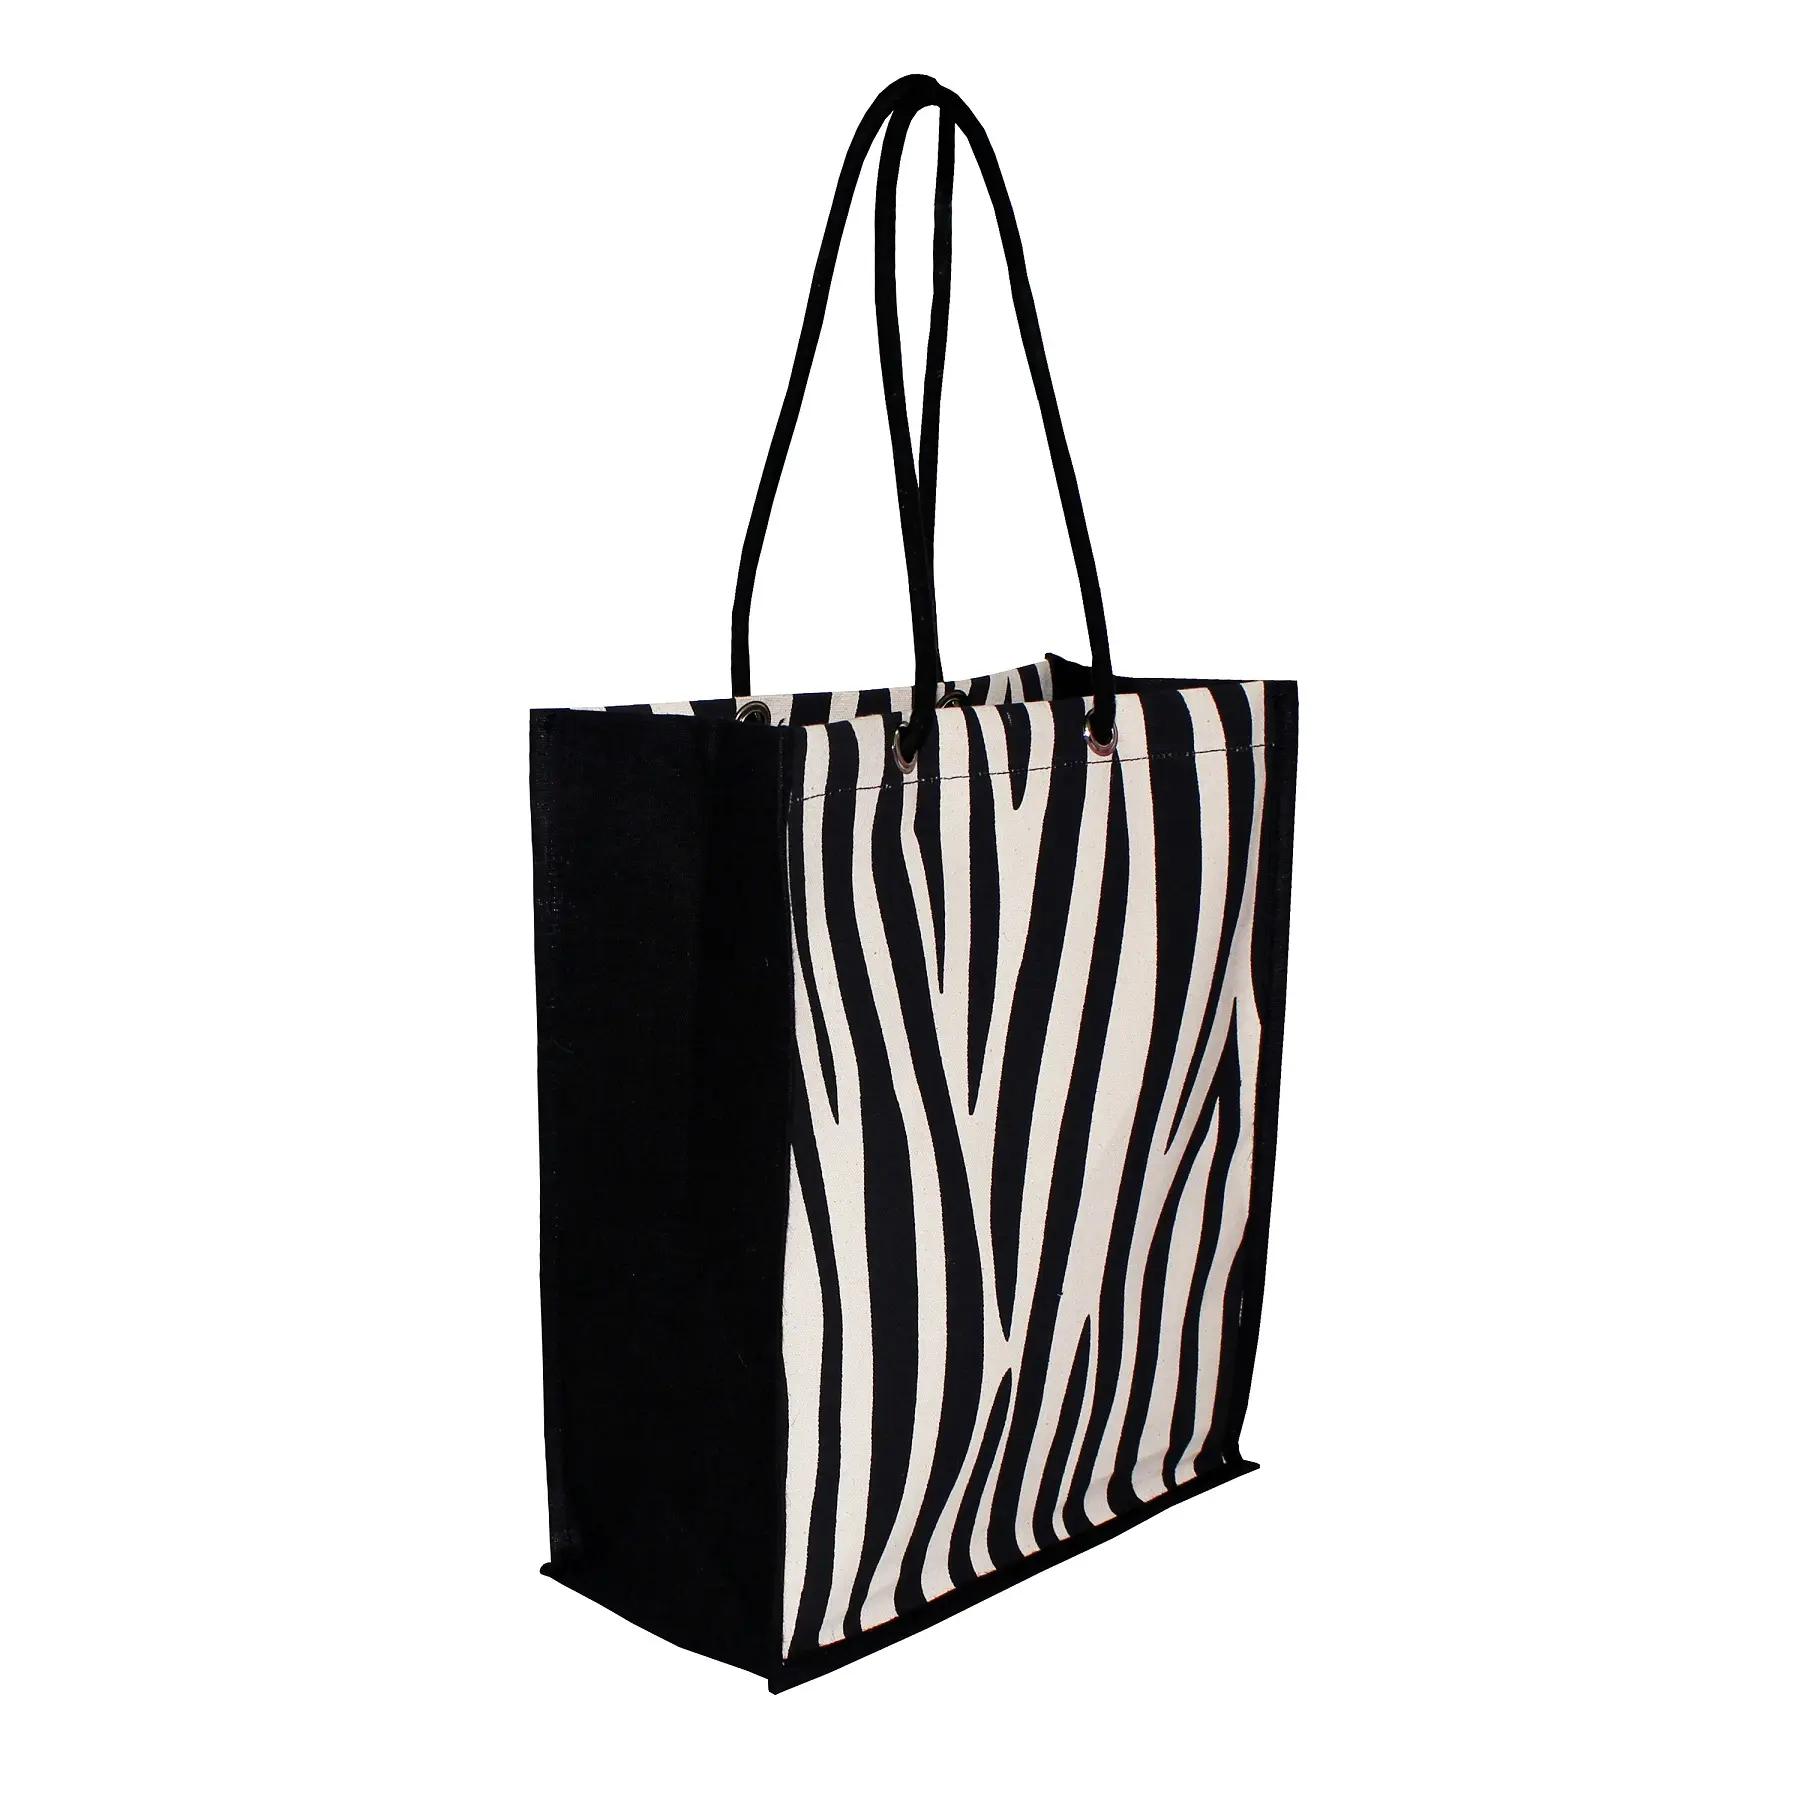 All New Customized Design Zebra Stripe Print PP Laminated 10 Oz Natural Cotton Canvas Shopping tote Bag For Women